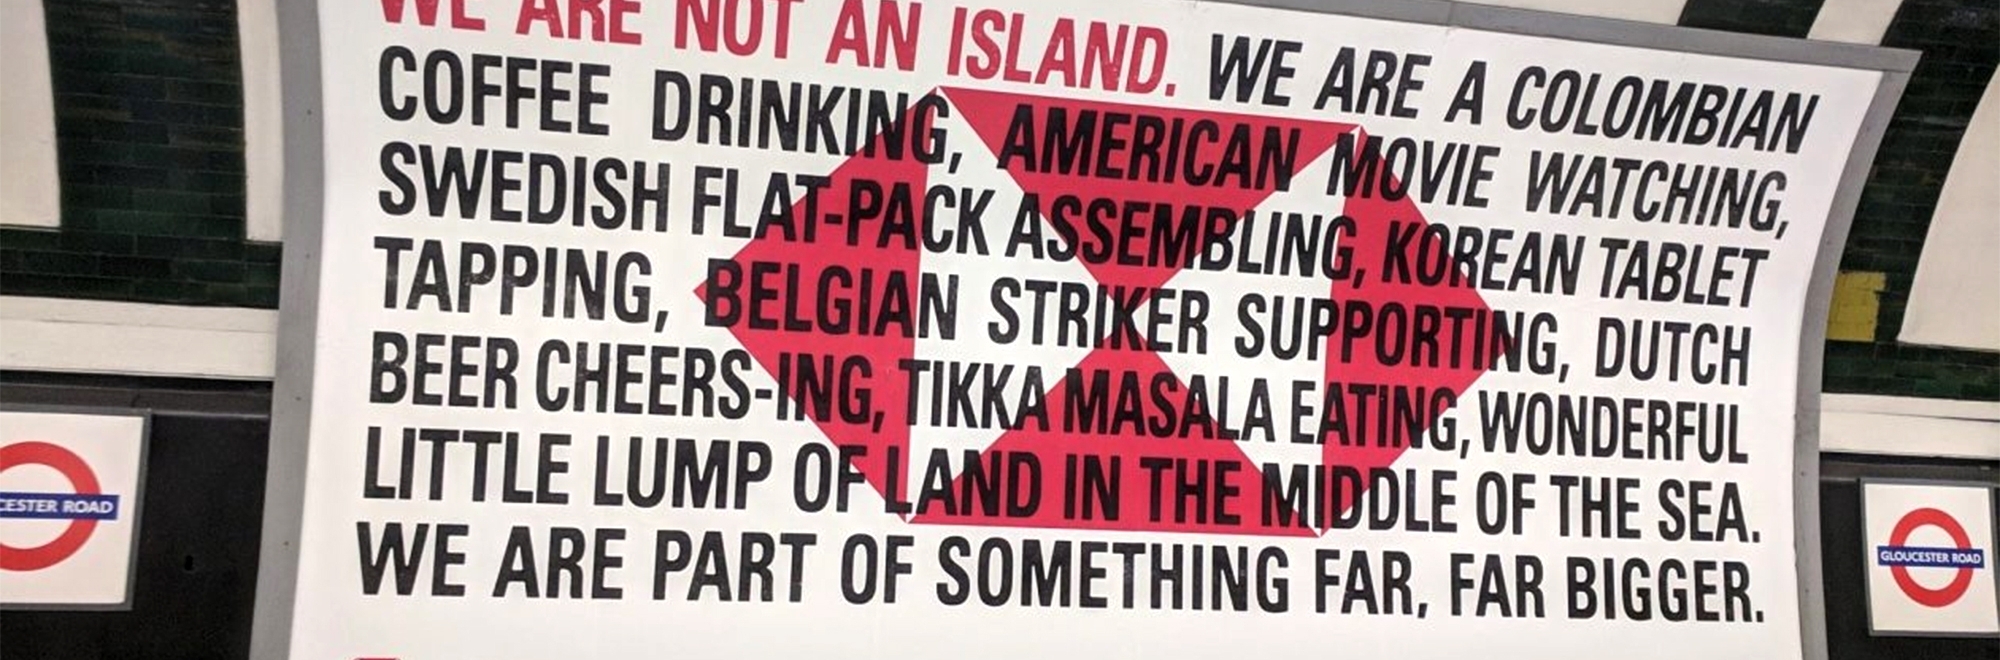 How HSBC's 'We are not an island’ campaign is brave and true to the brand